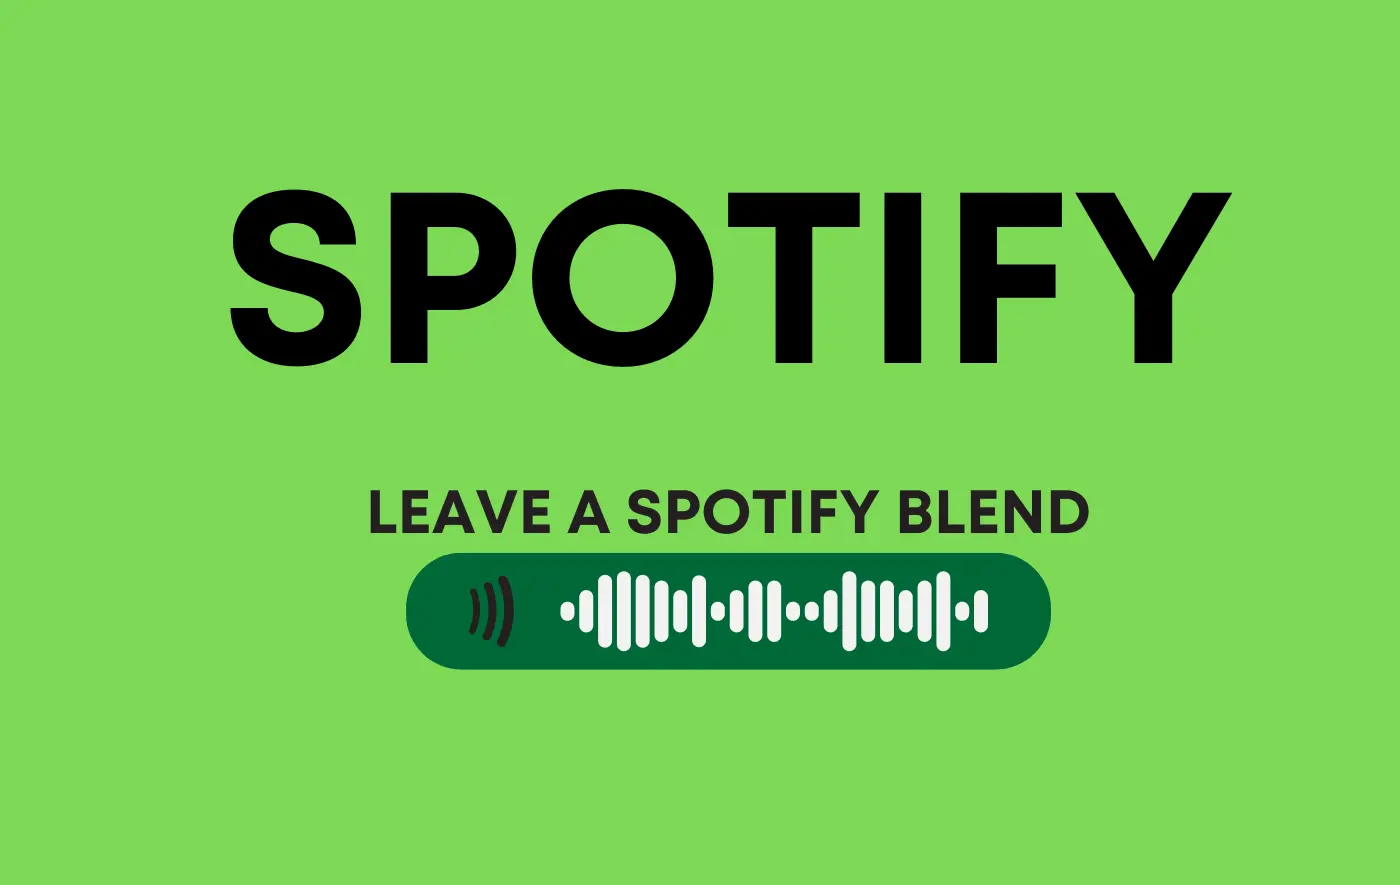 How to Leave a Spotify Blend